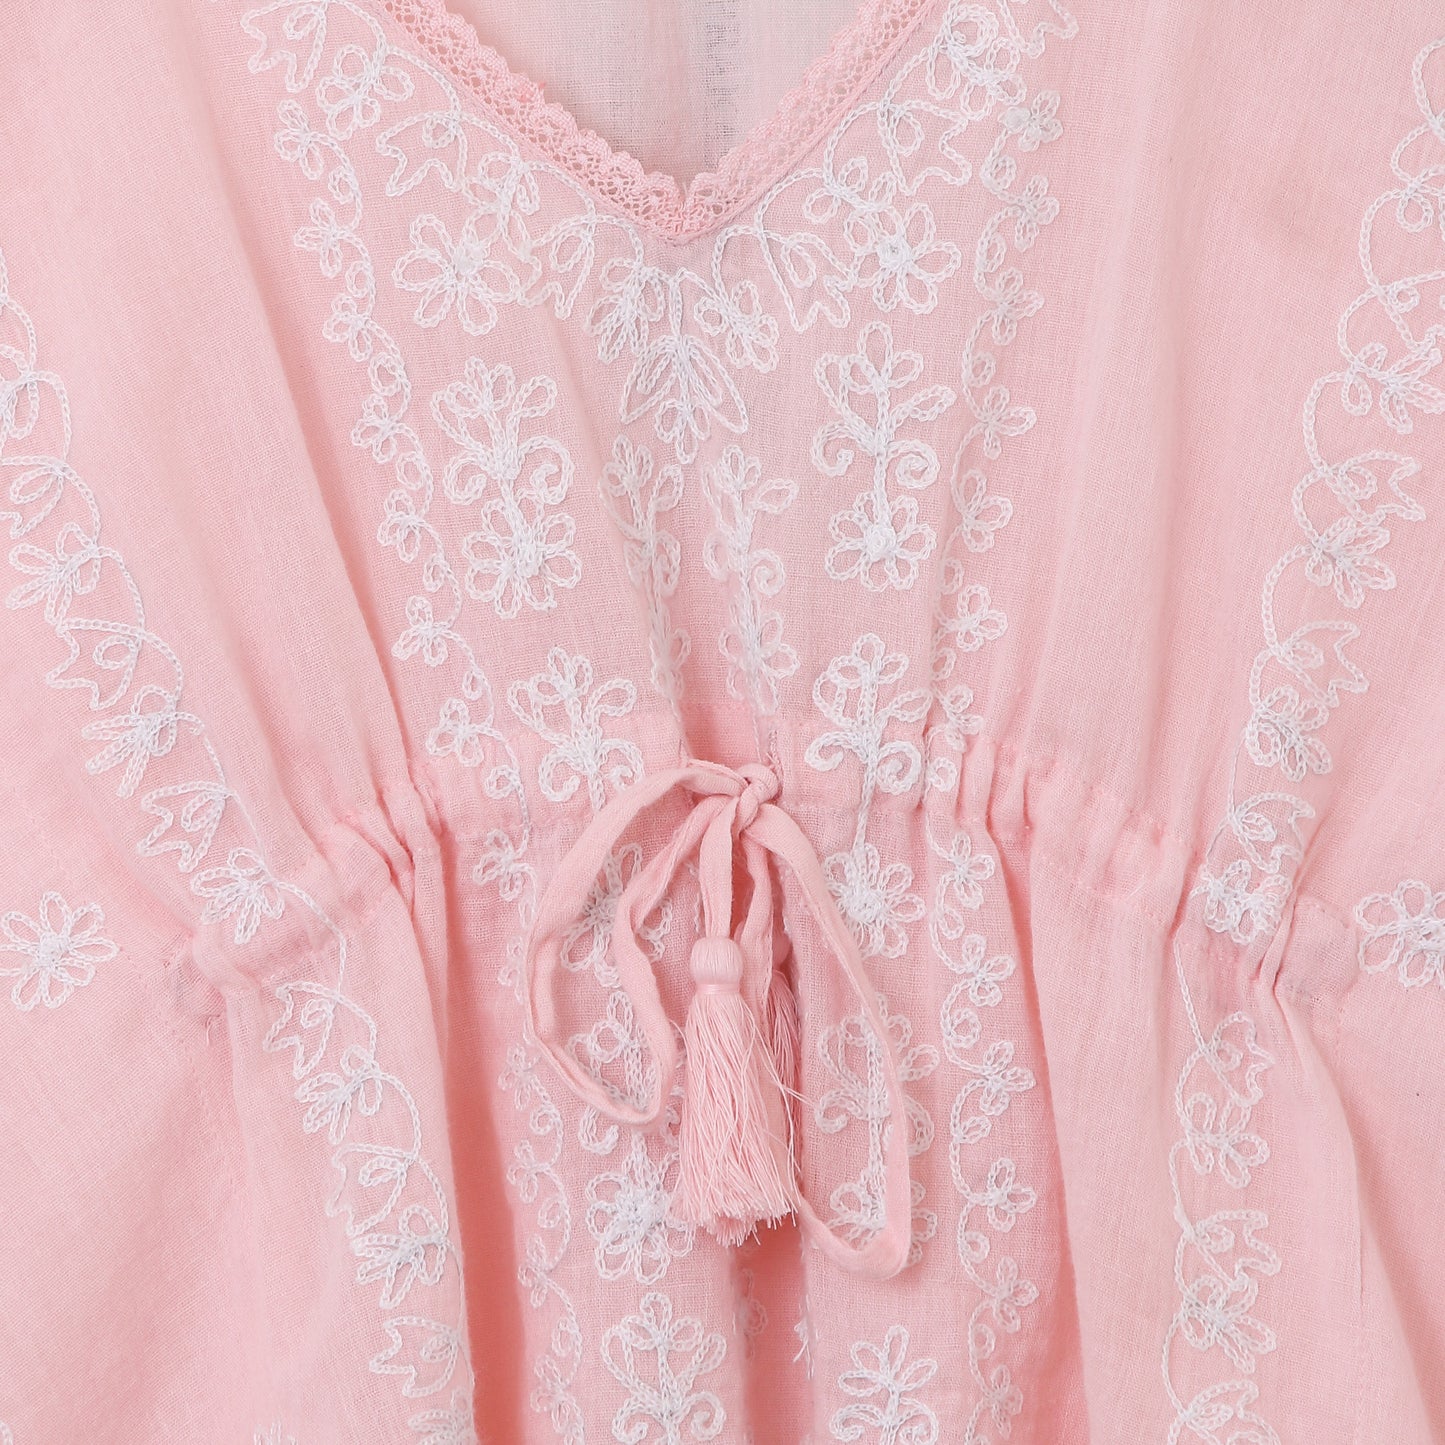 PINK AND WHITE  EMBROIDERED KAFTAN,HAS A V NECK,GATHERED AND TIE UP DETAIL ON THE FRONT